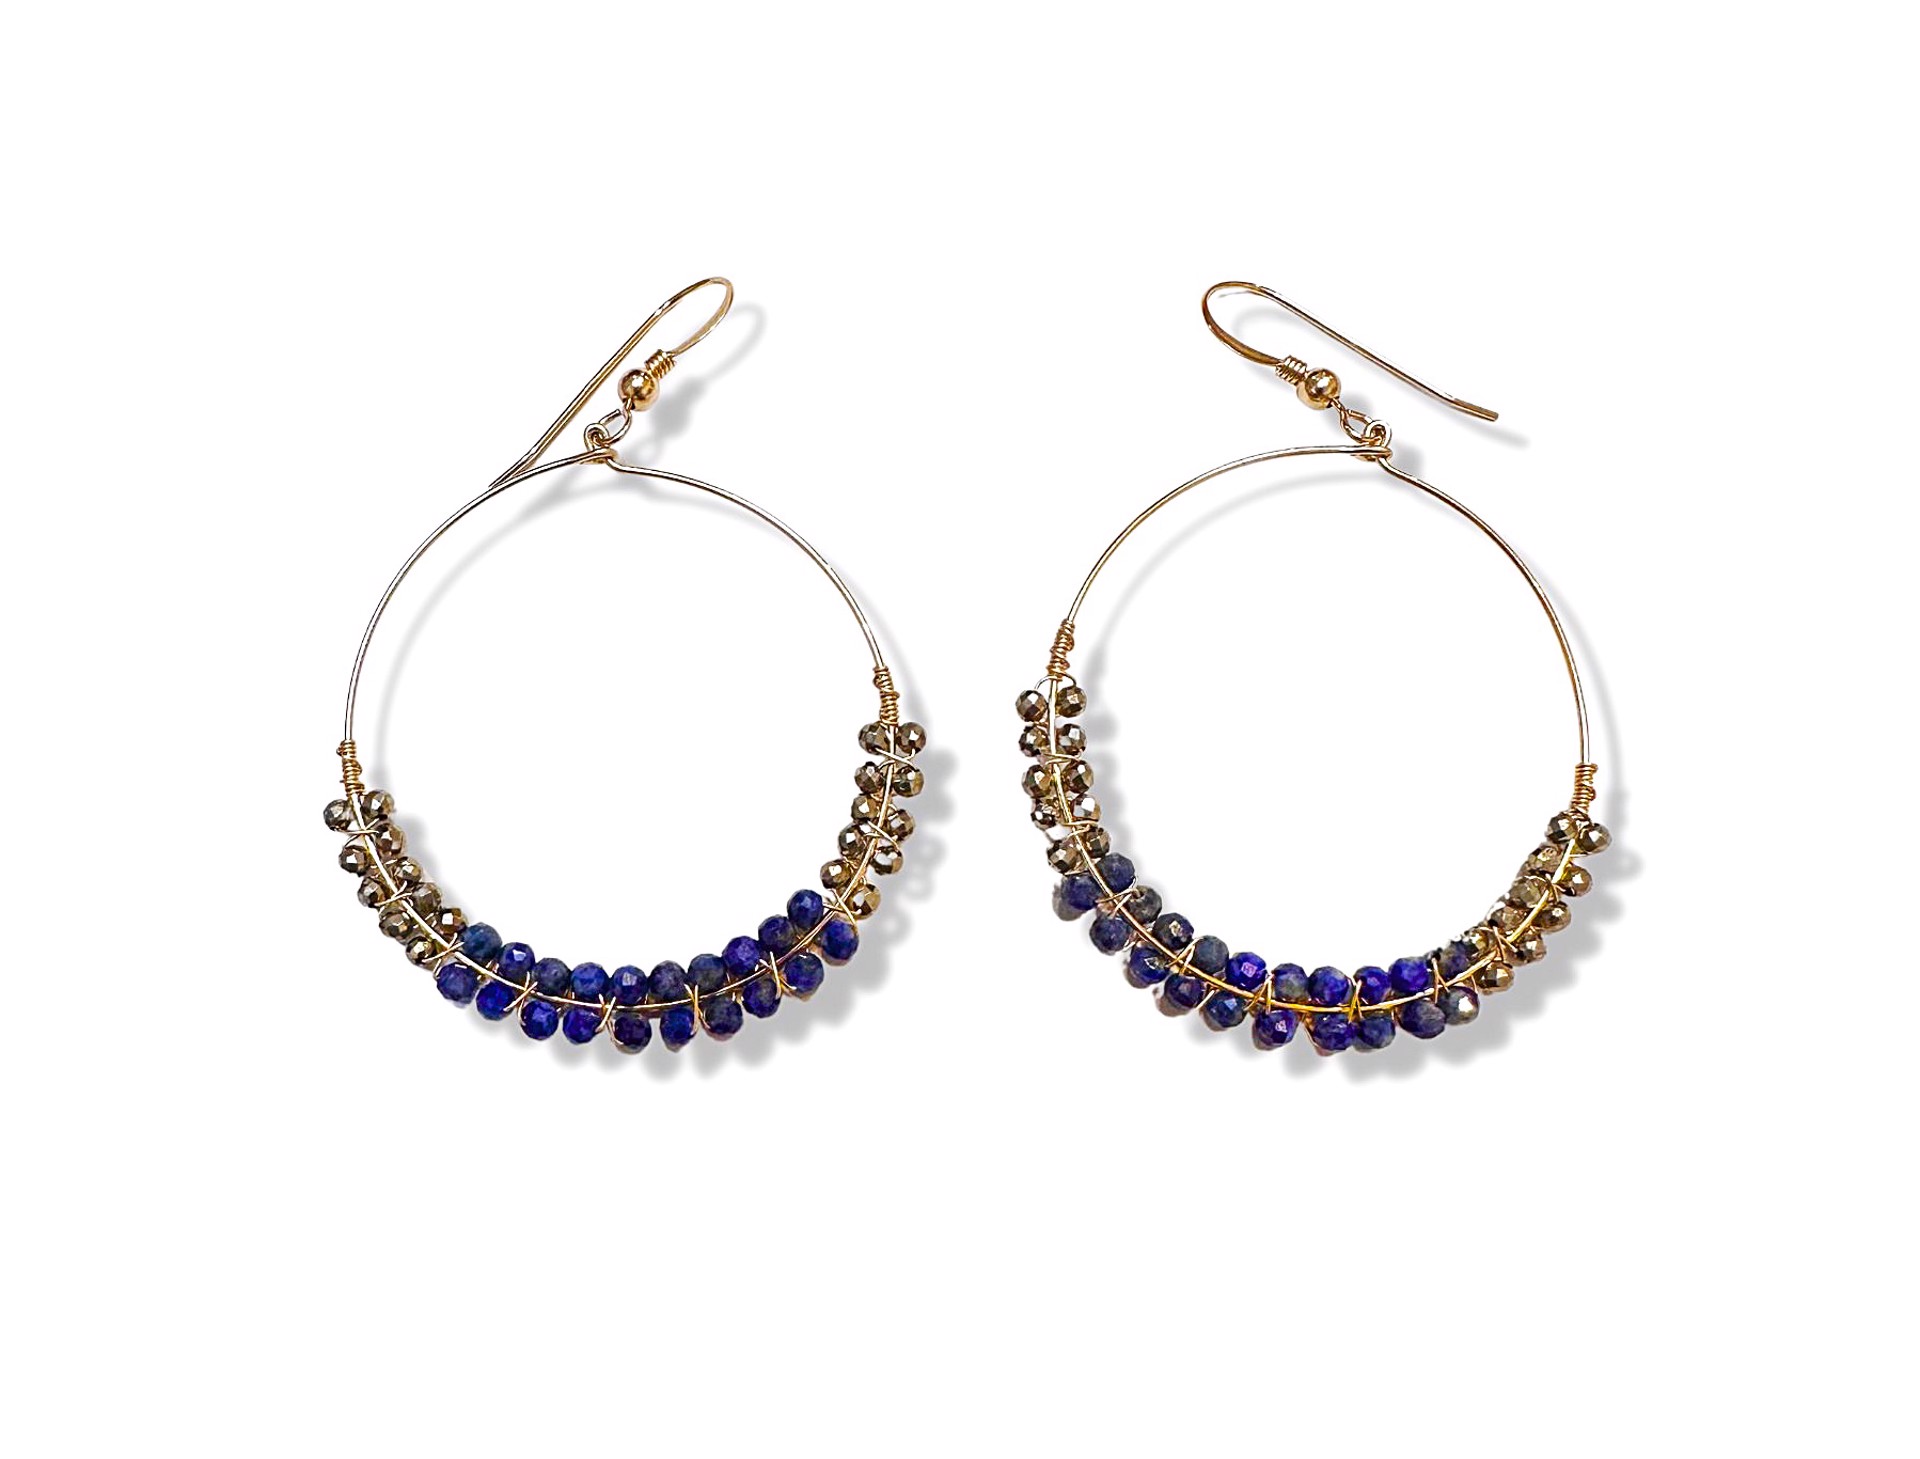 Earrings - Lapis and Pyrite Hoops with 14K Gold Filling by Julia Balestracci